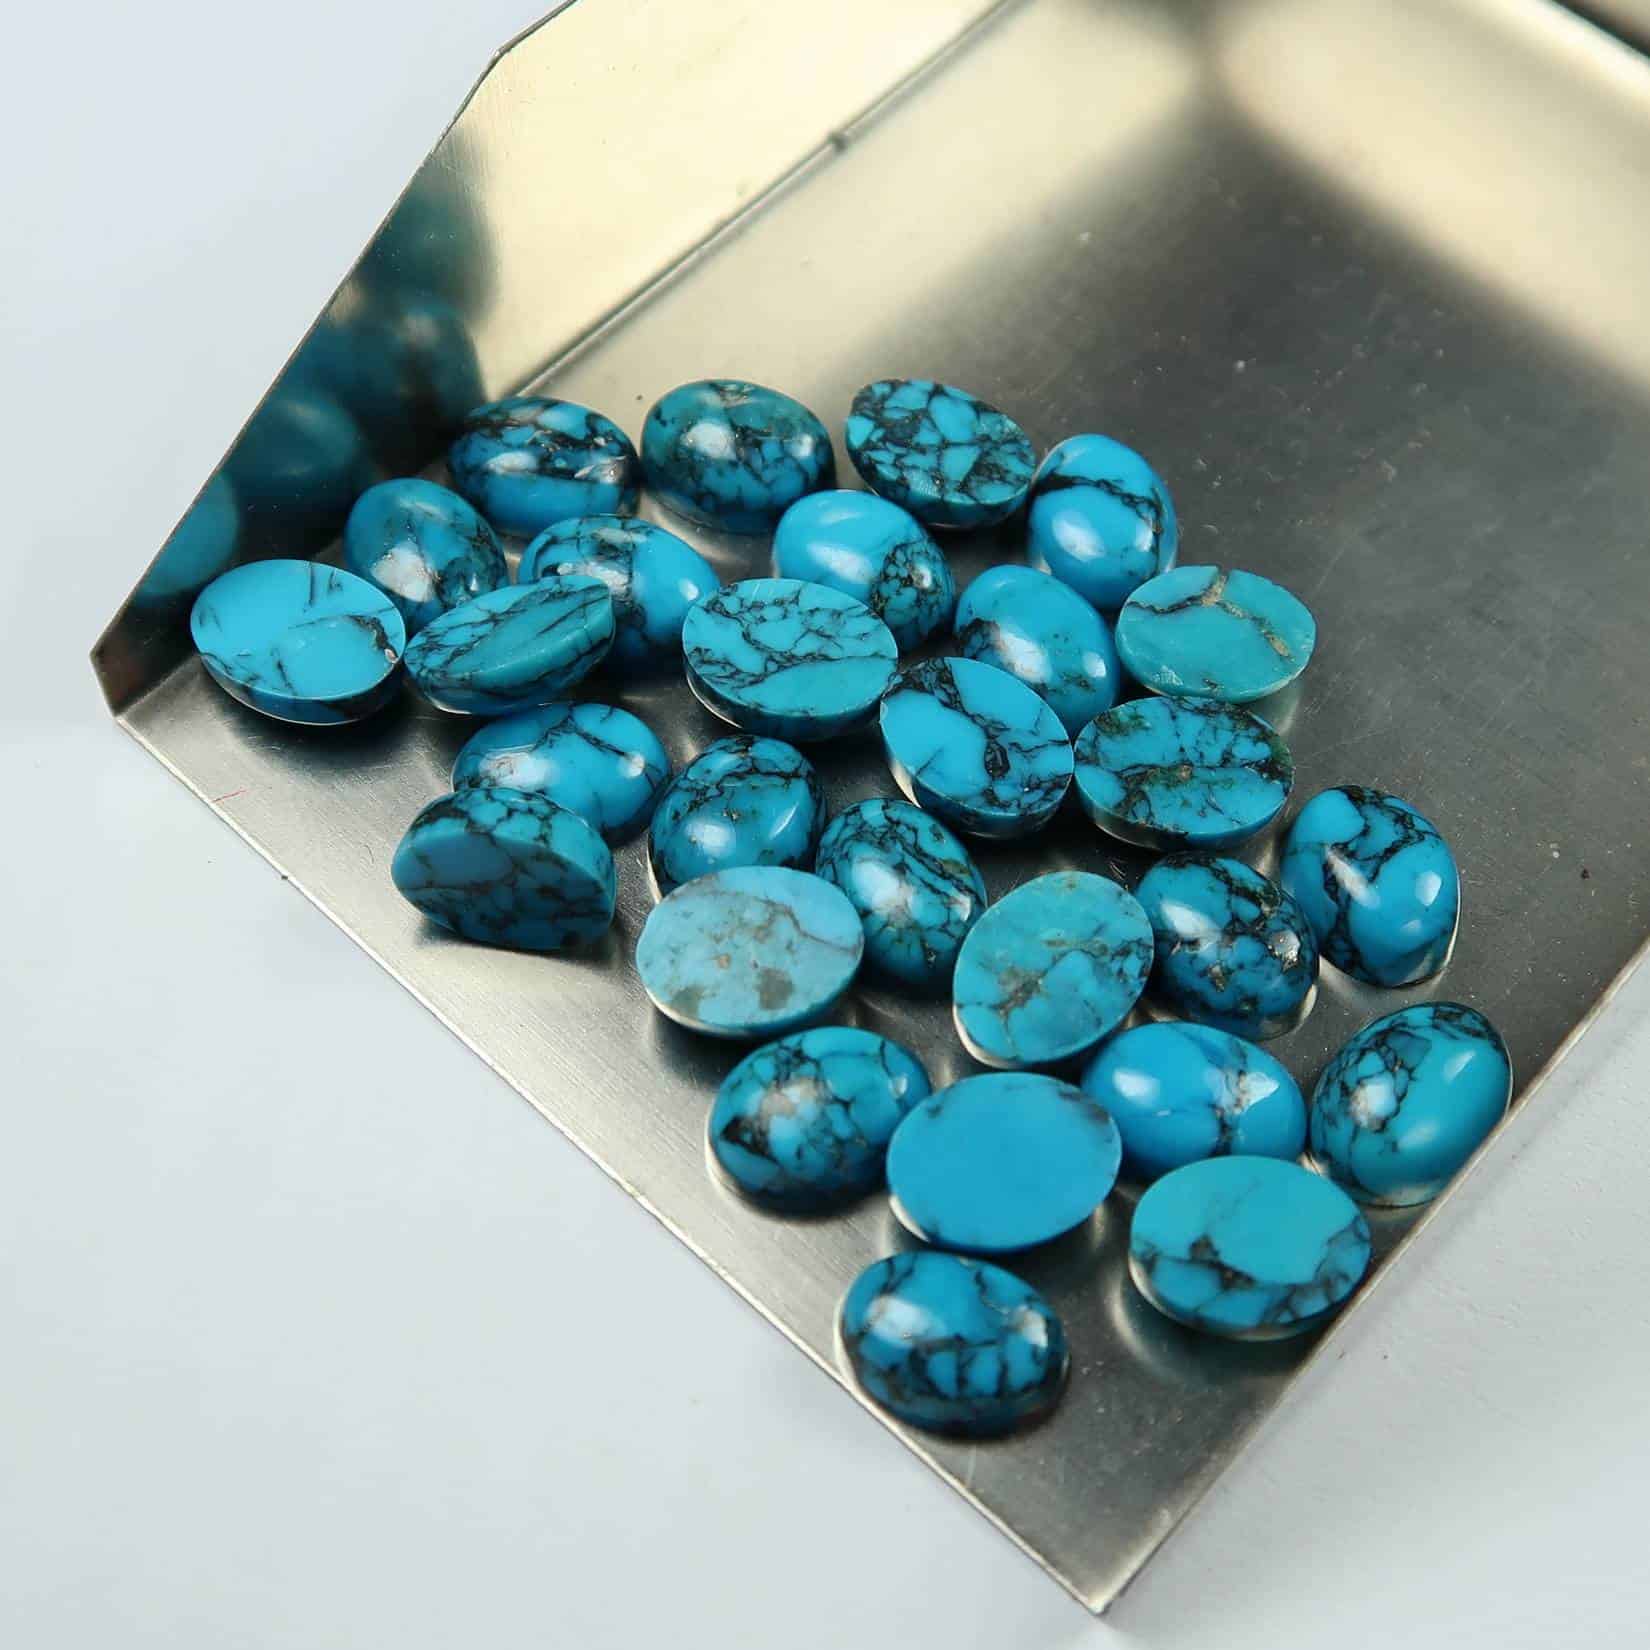 Natural Turquoise Cabochons - Blue Turquoise Cabochons for Sale - UK